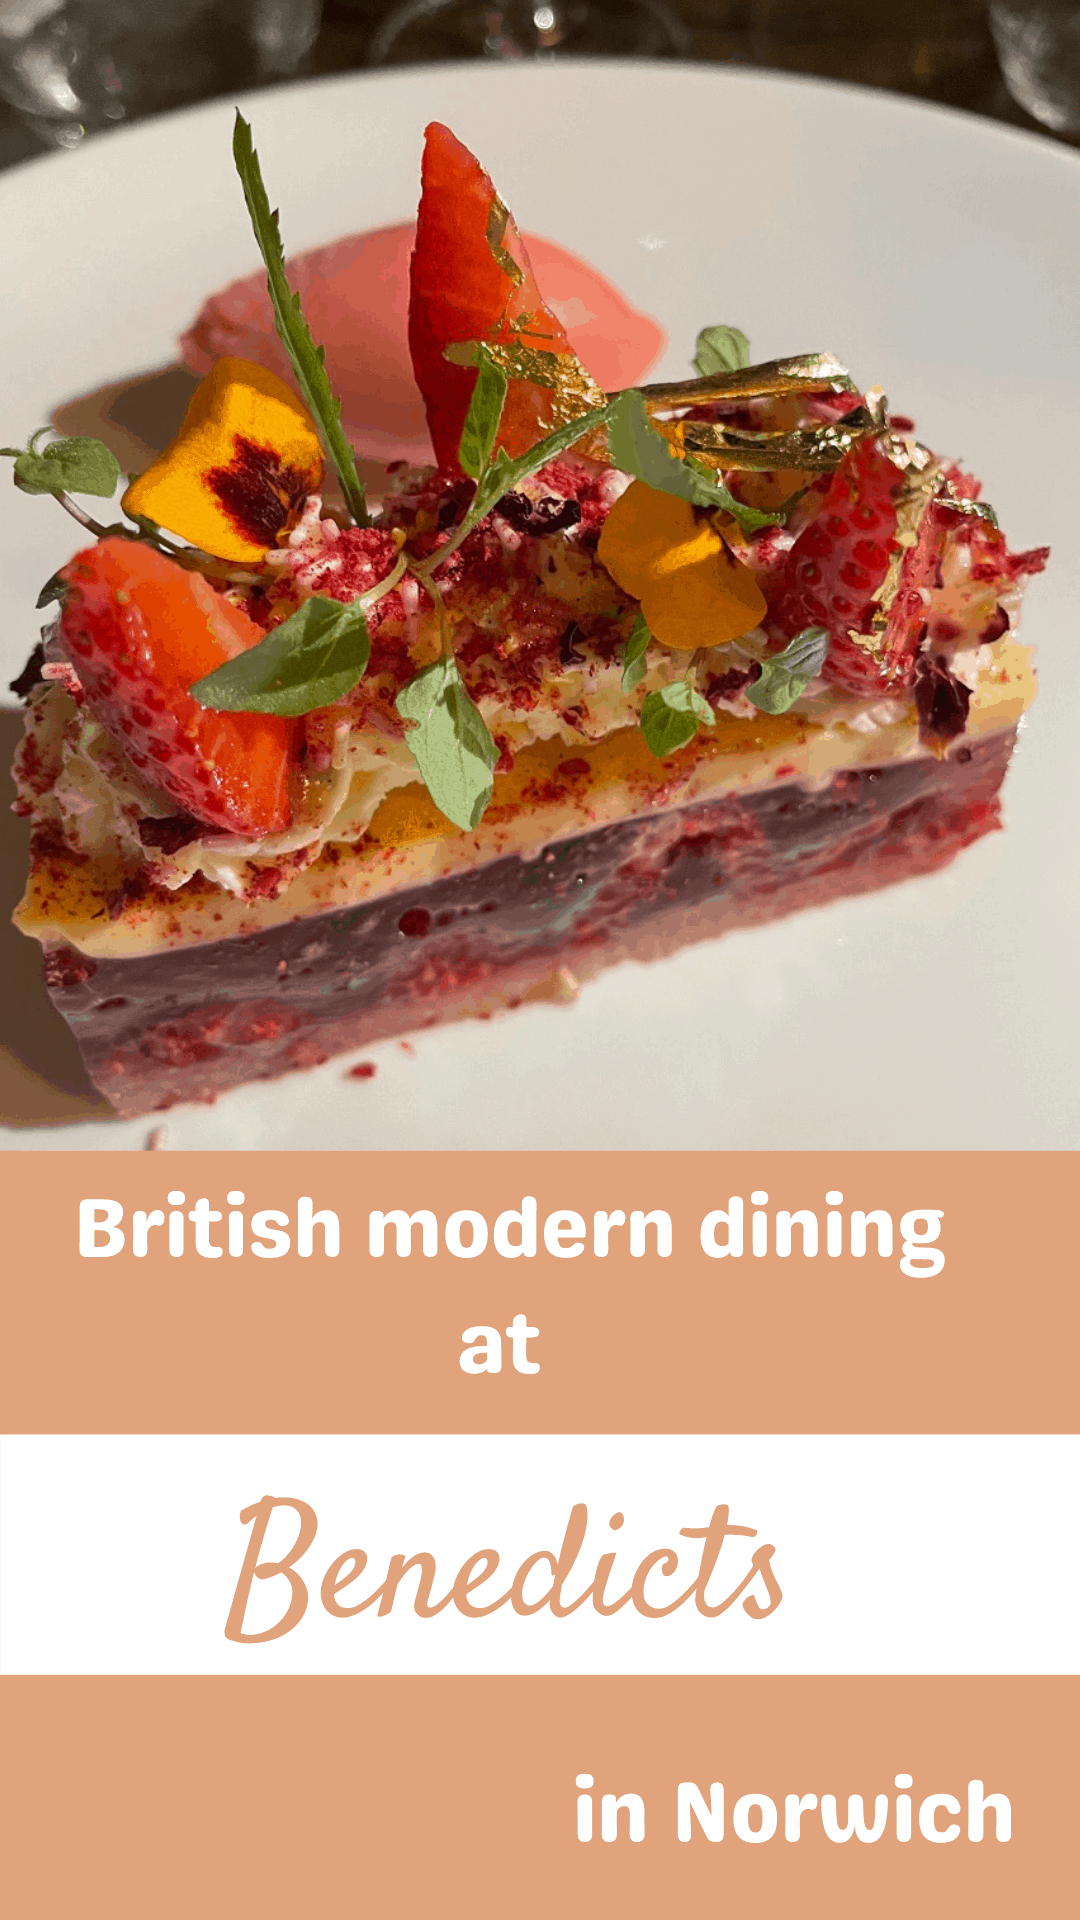 Modern British dining at Benedicts in Norwich